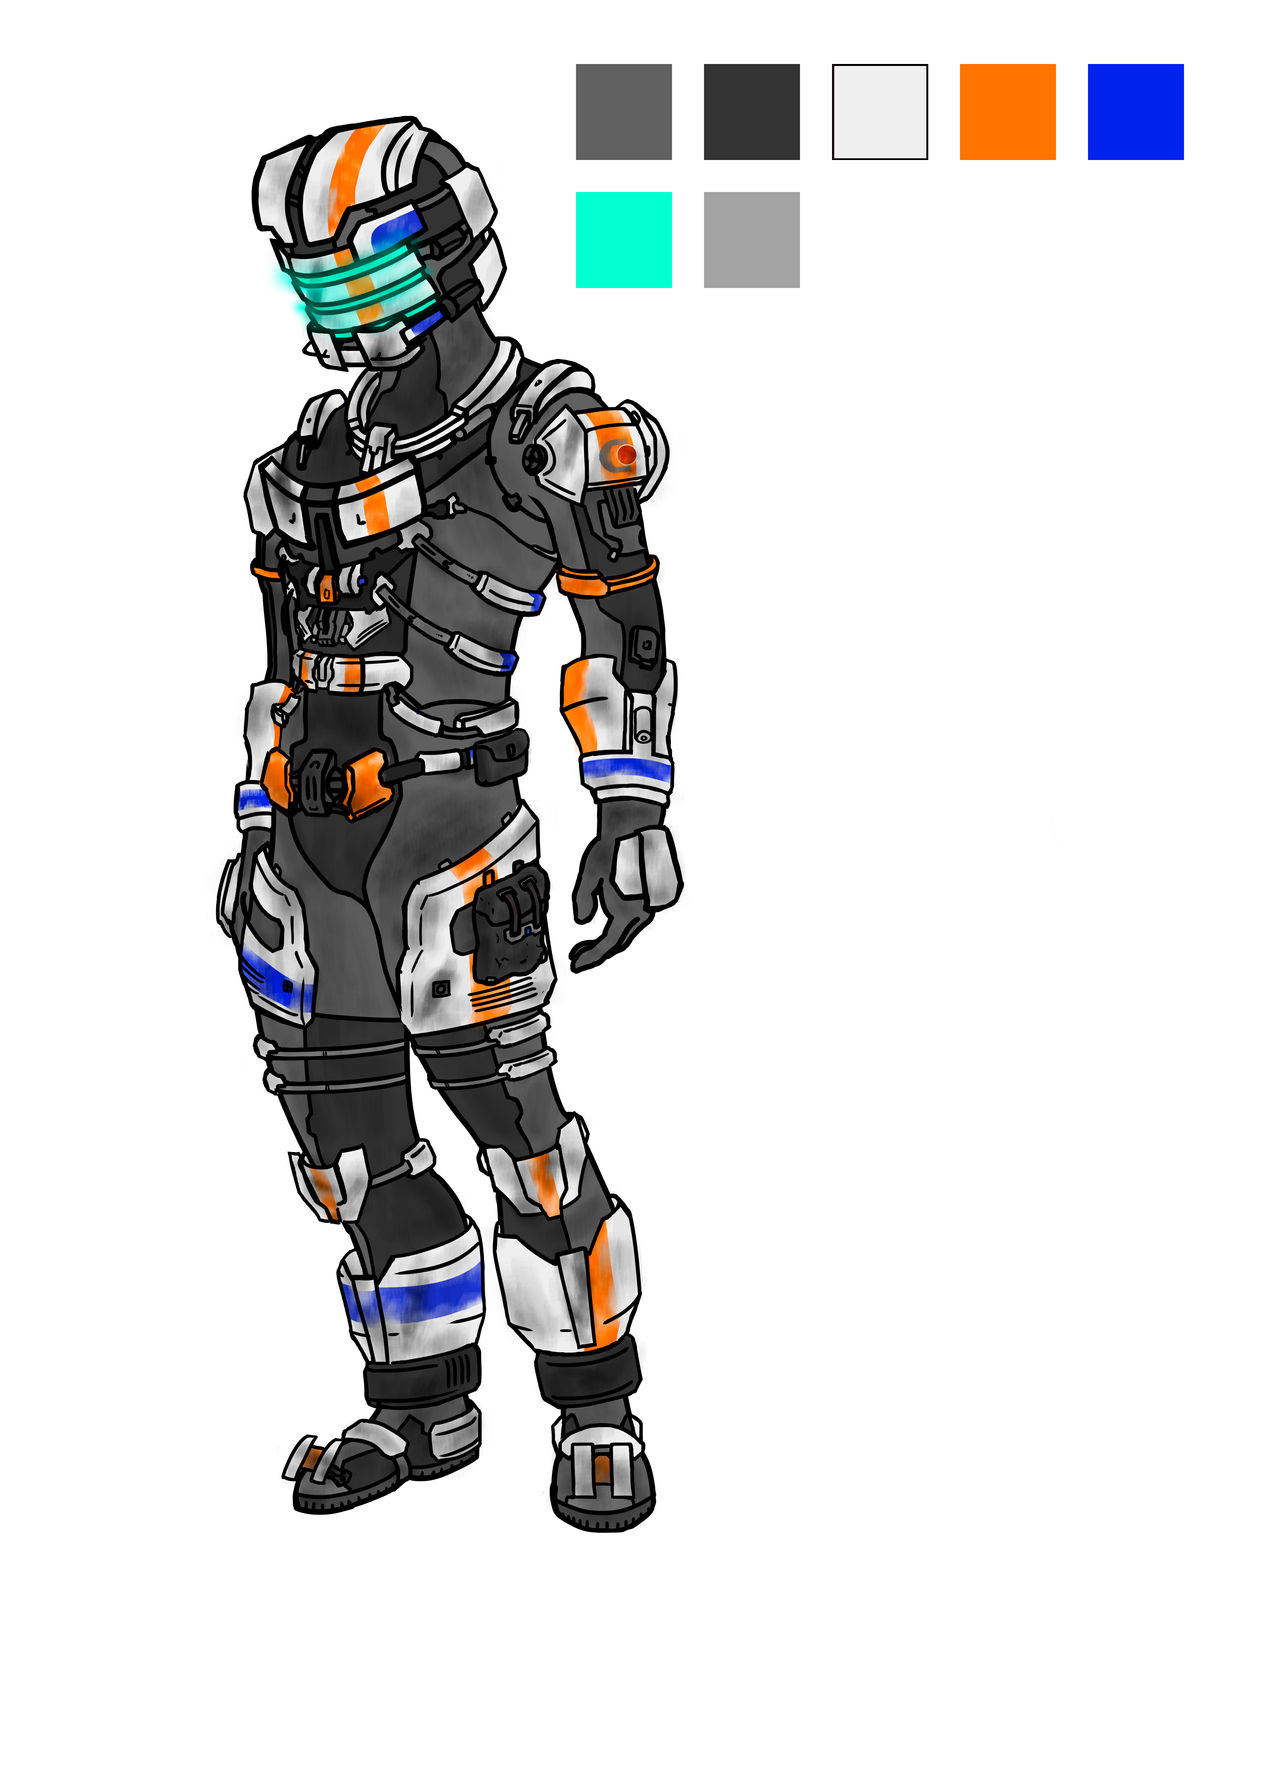 Dead Space 3 Arctic Engineering Suit Concept by LethalMoose on